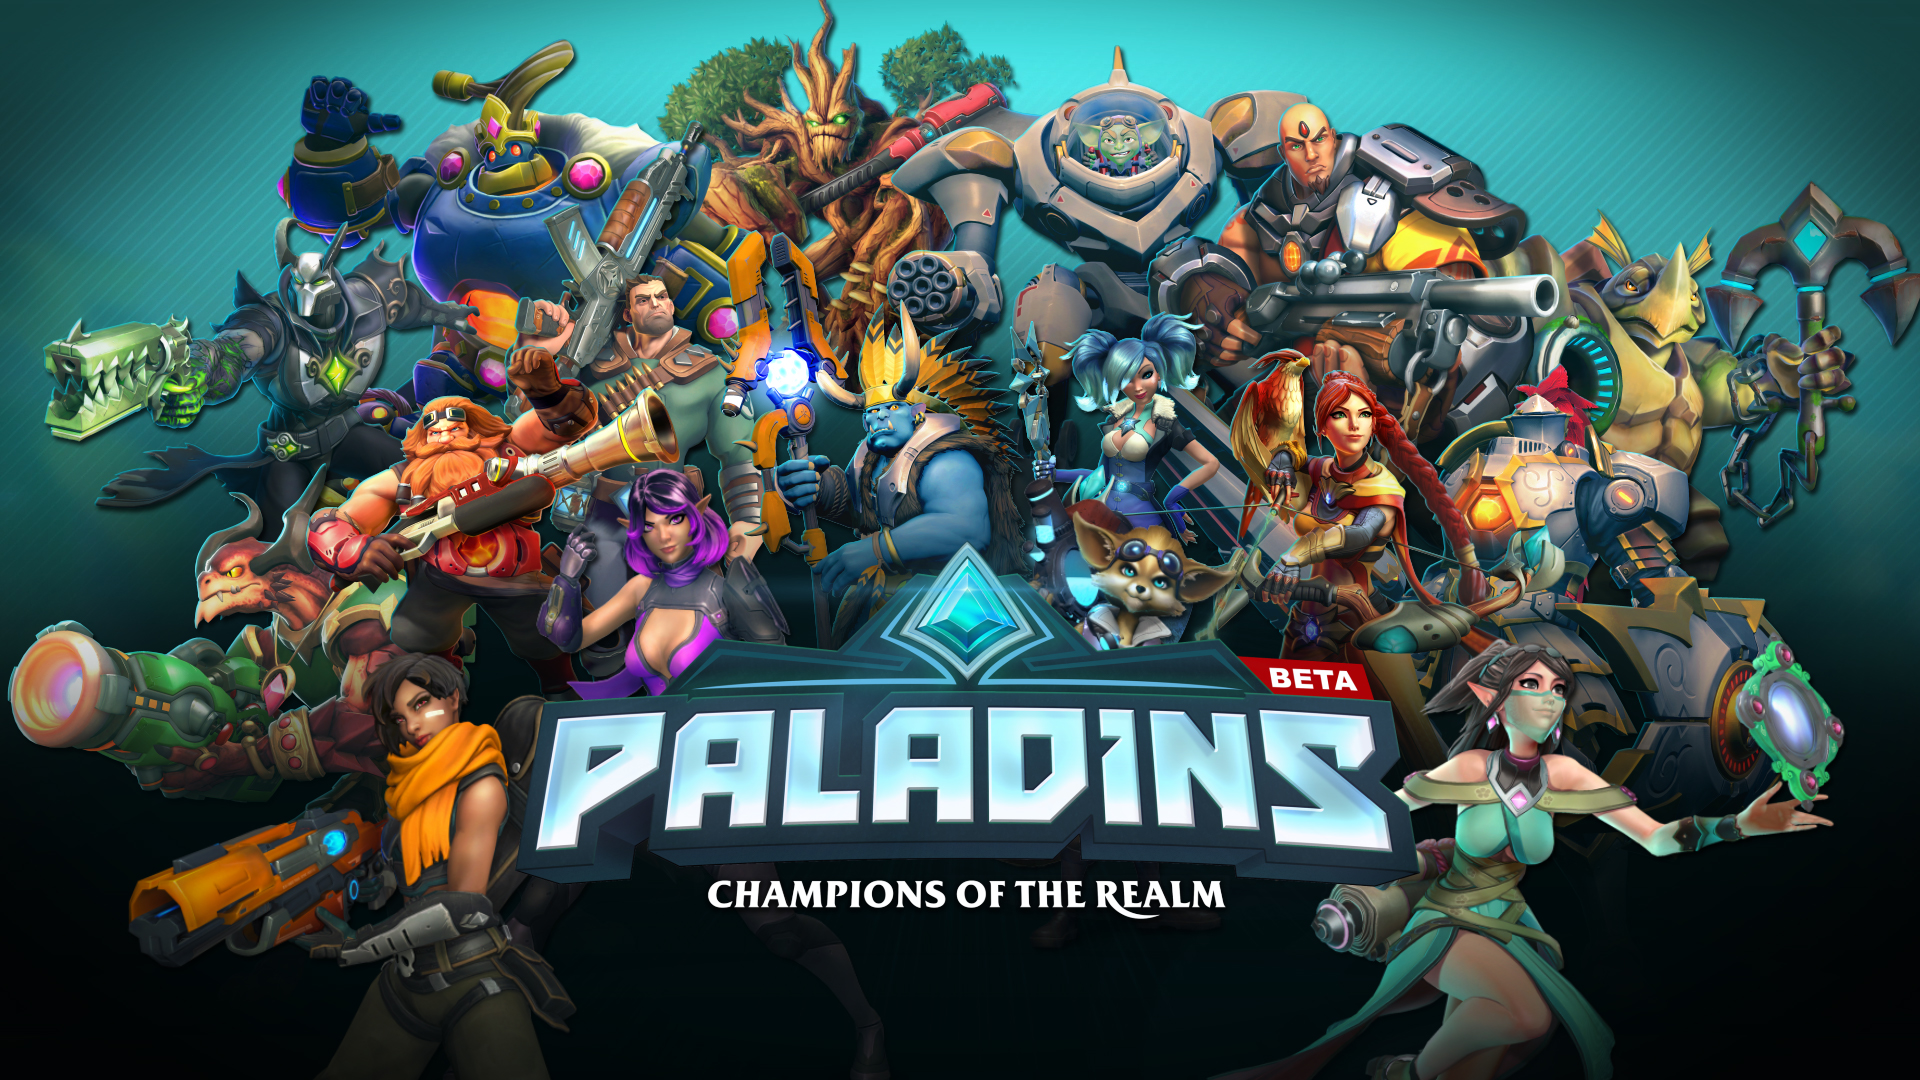 Paladins PC Download Free Full Game For windows